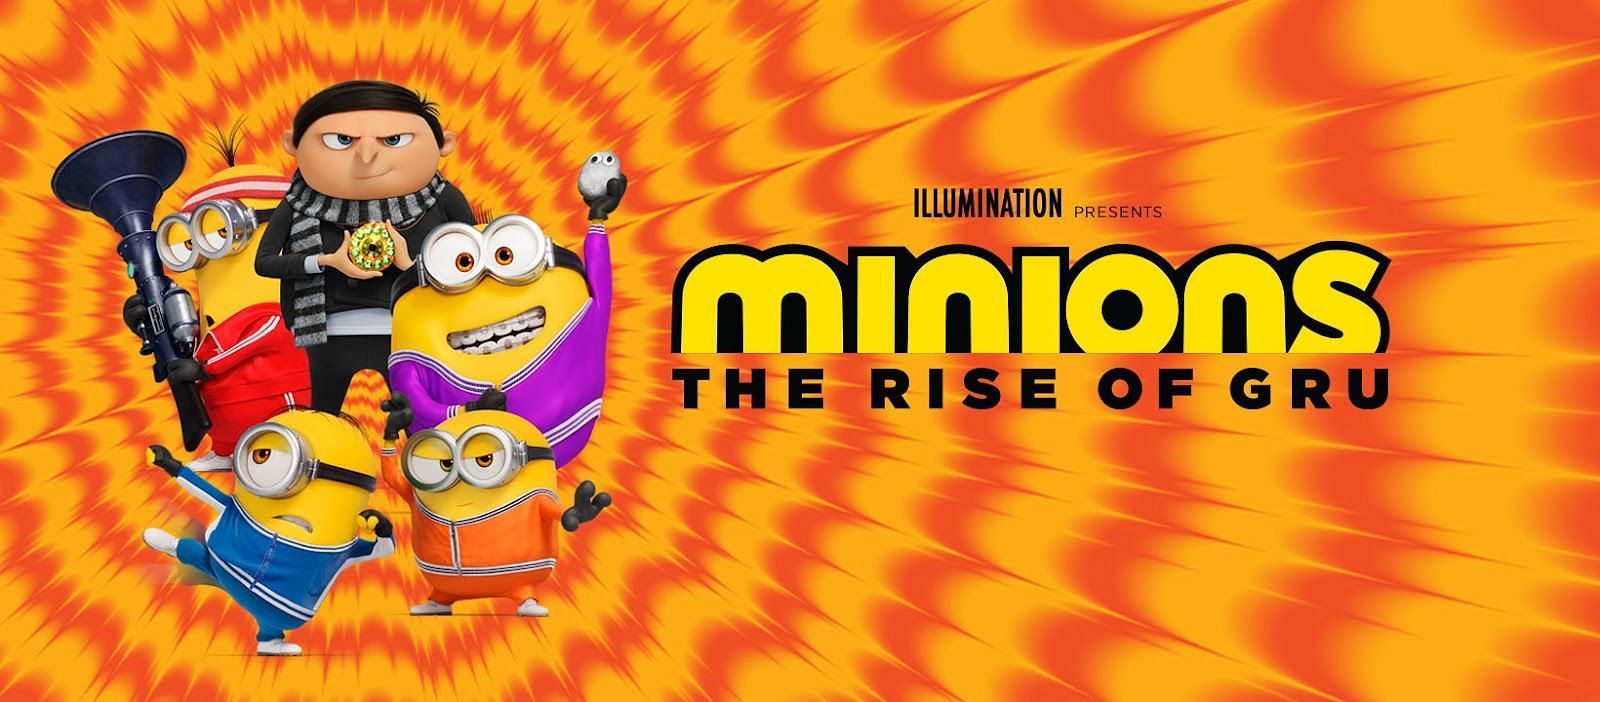 Where to watch Minions The Rise of Gru?